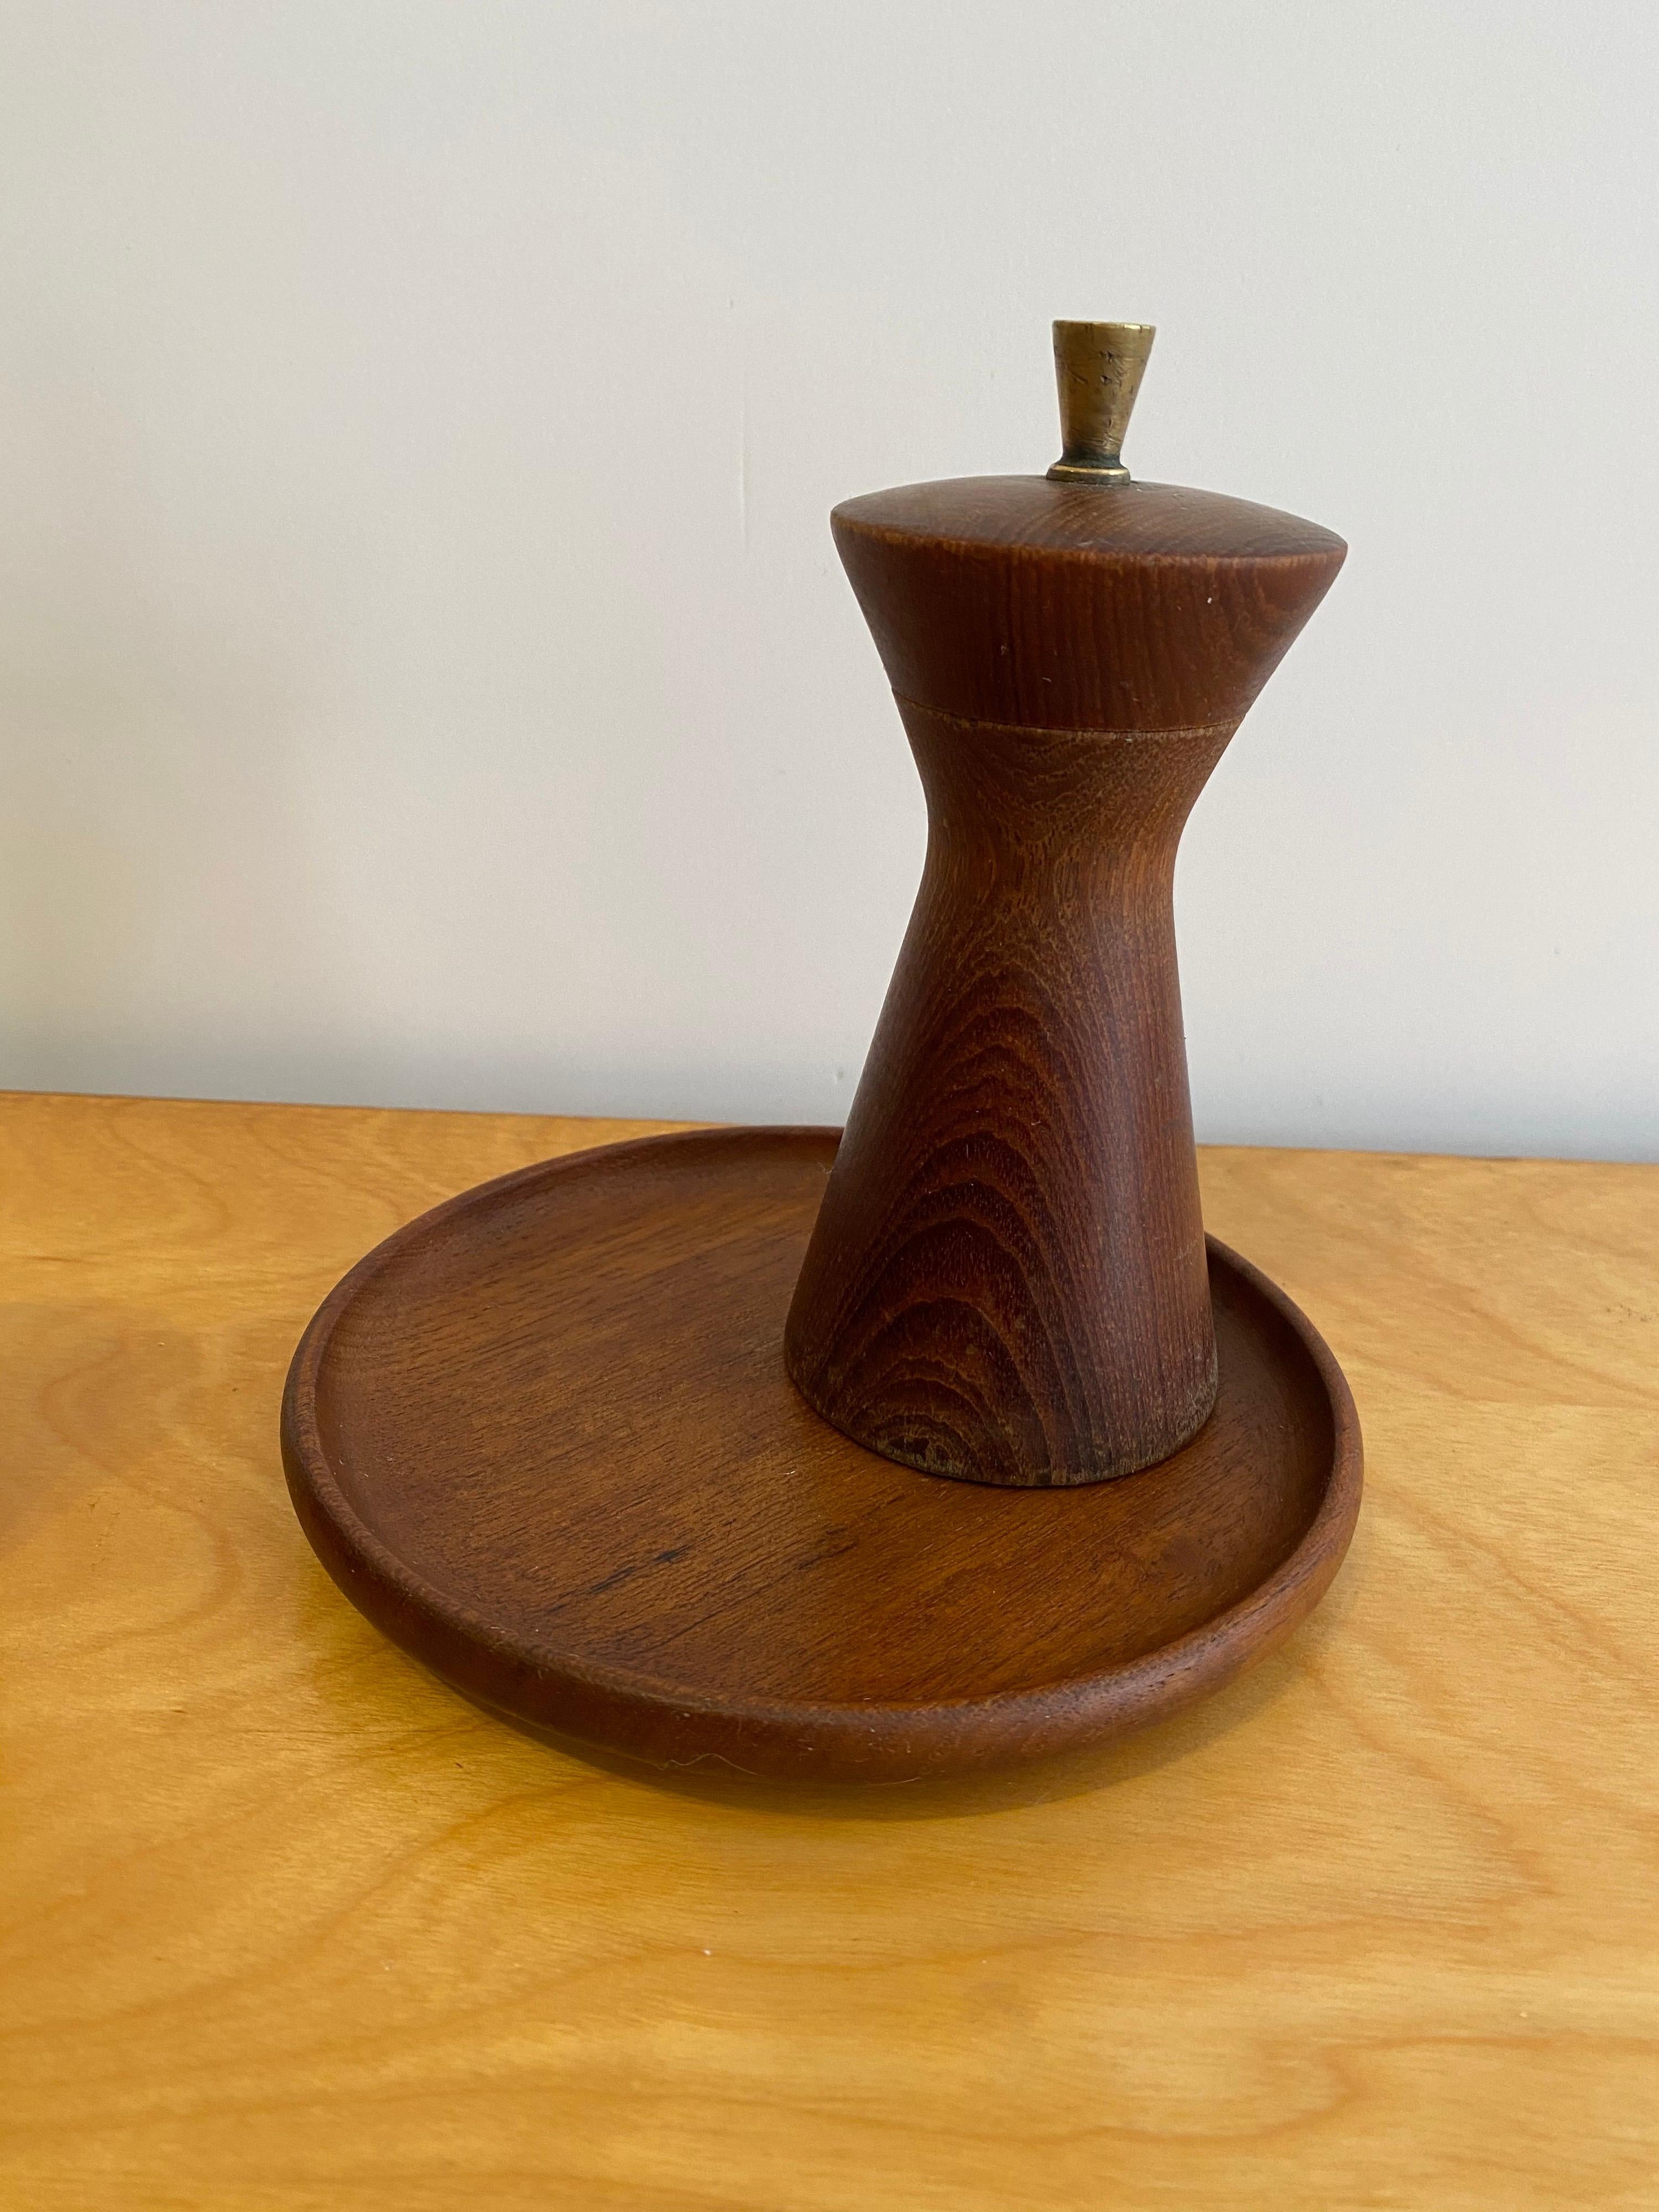 Kay Bojesen 3 piece teak condiment set. Known for his articulated Jointed Monkey, Bojesen alson produced some outstanding Danish designs for dining as well! Turned from teak this set includes a round tray with rim, pepper mill and small lidded